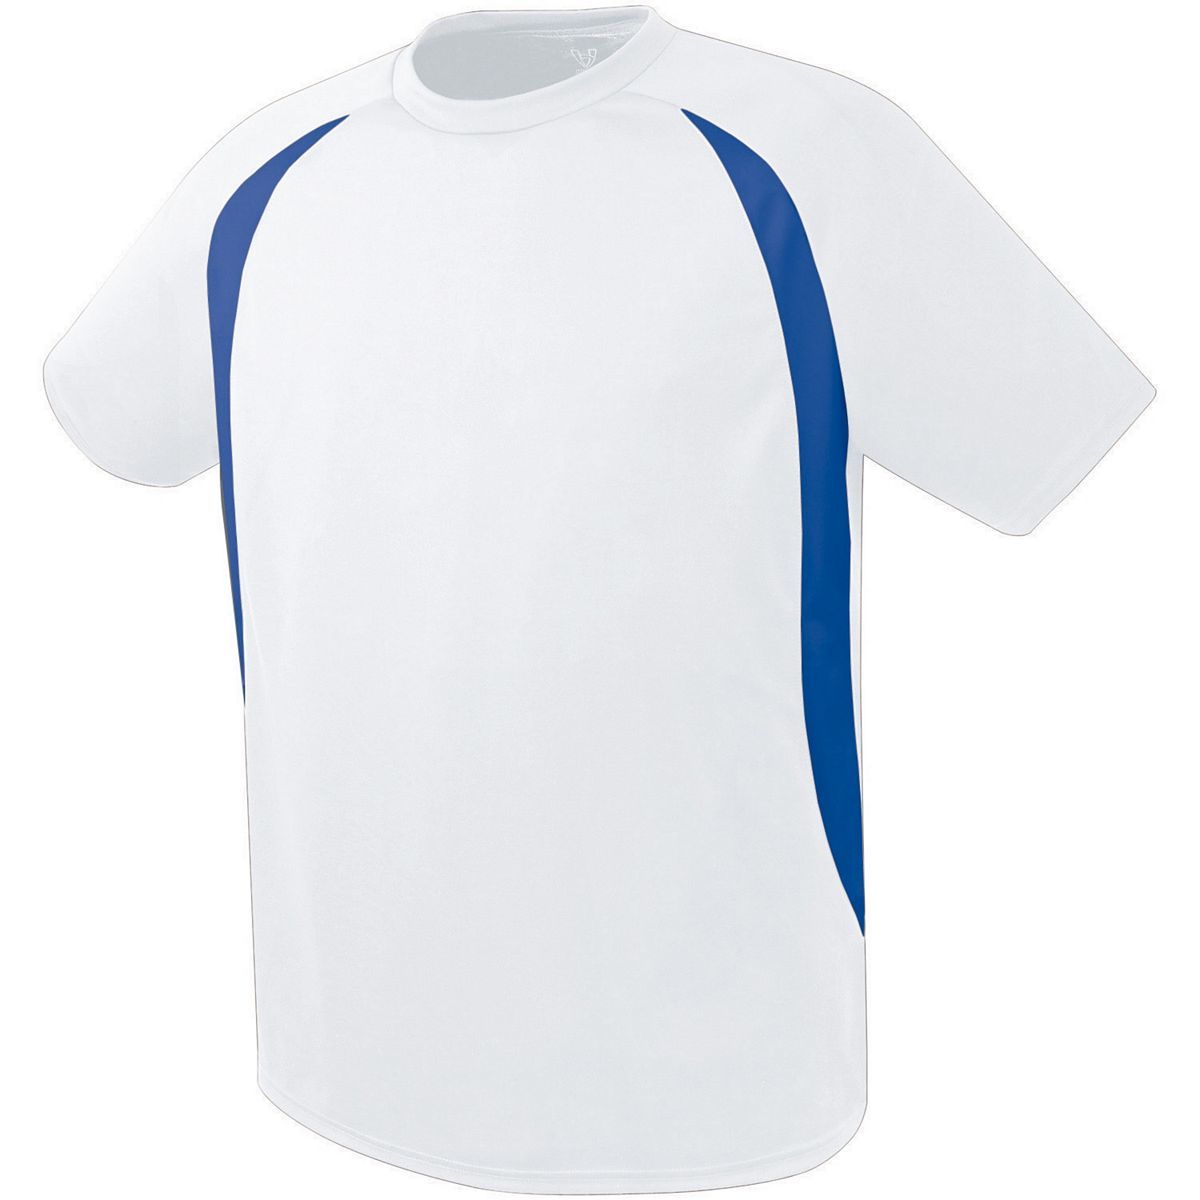 High 5 Youth Liberty Soccer Jersey in White/Royal  -Part of the Youth, Youth-Jersey, High5-Products, Soccer, Shirts, All-Sports-1 product lines at KanaleyCreations.com